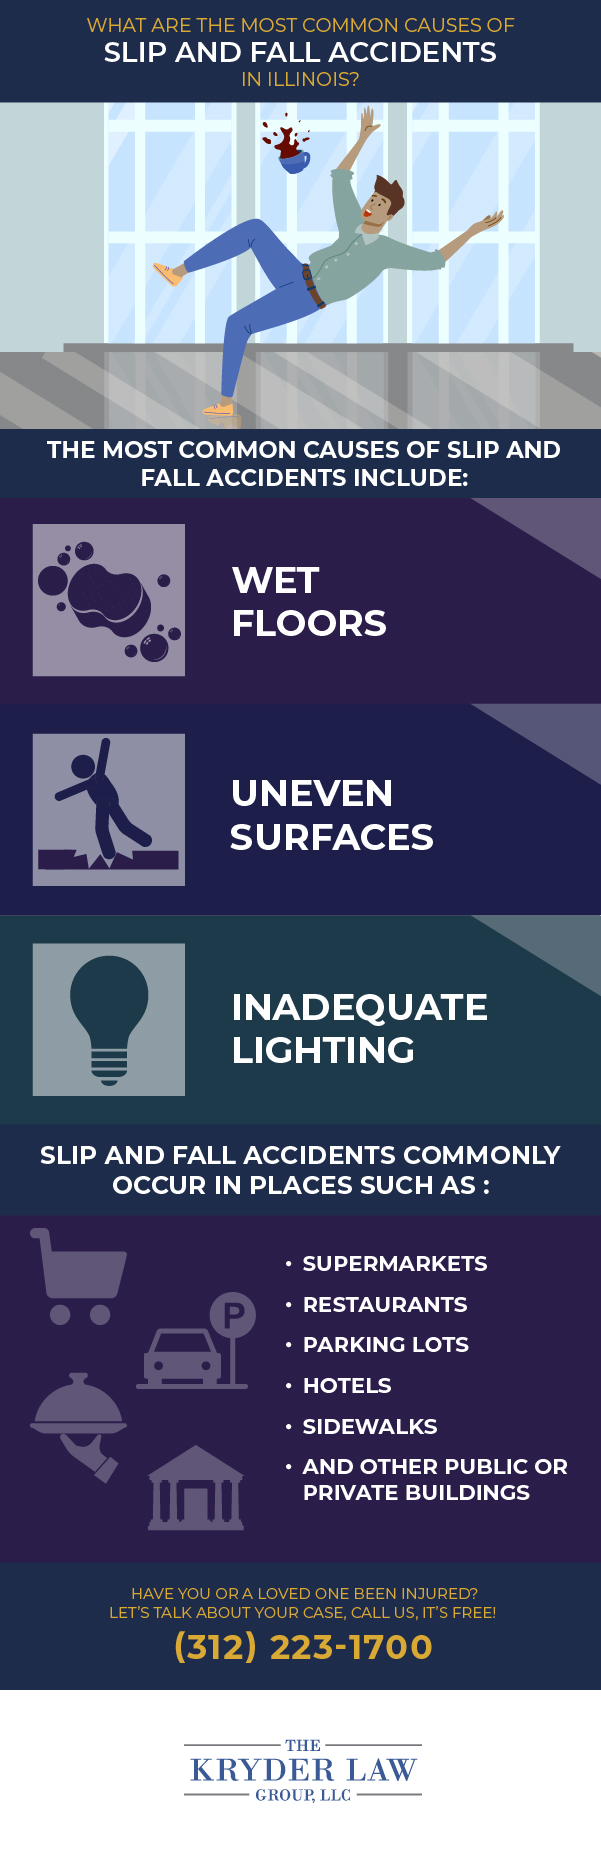 Most Common Causes of Slip and Falls in Illinois Infographic